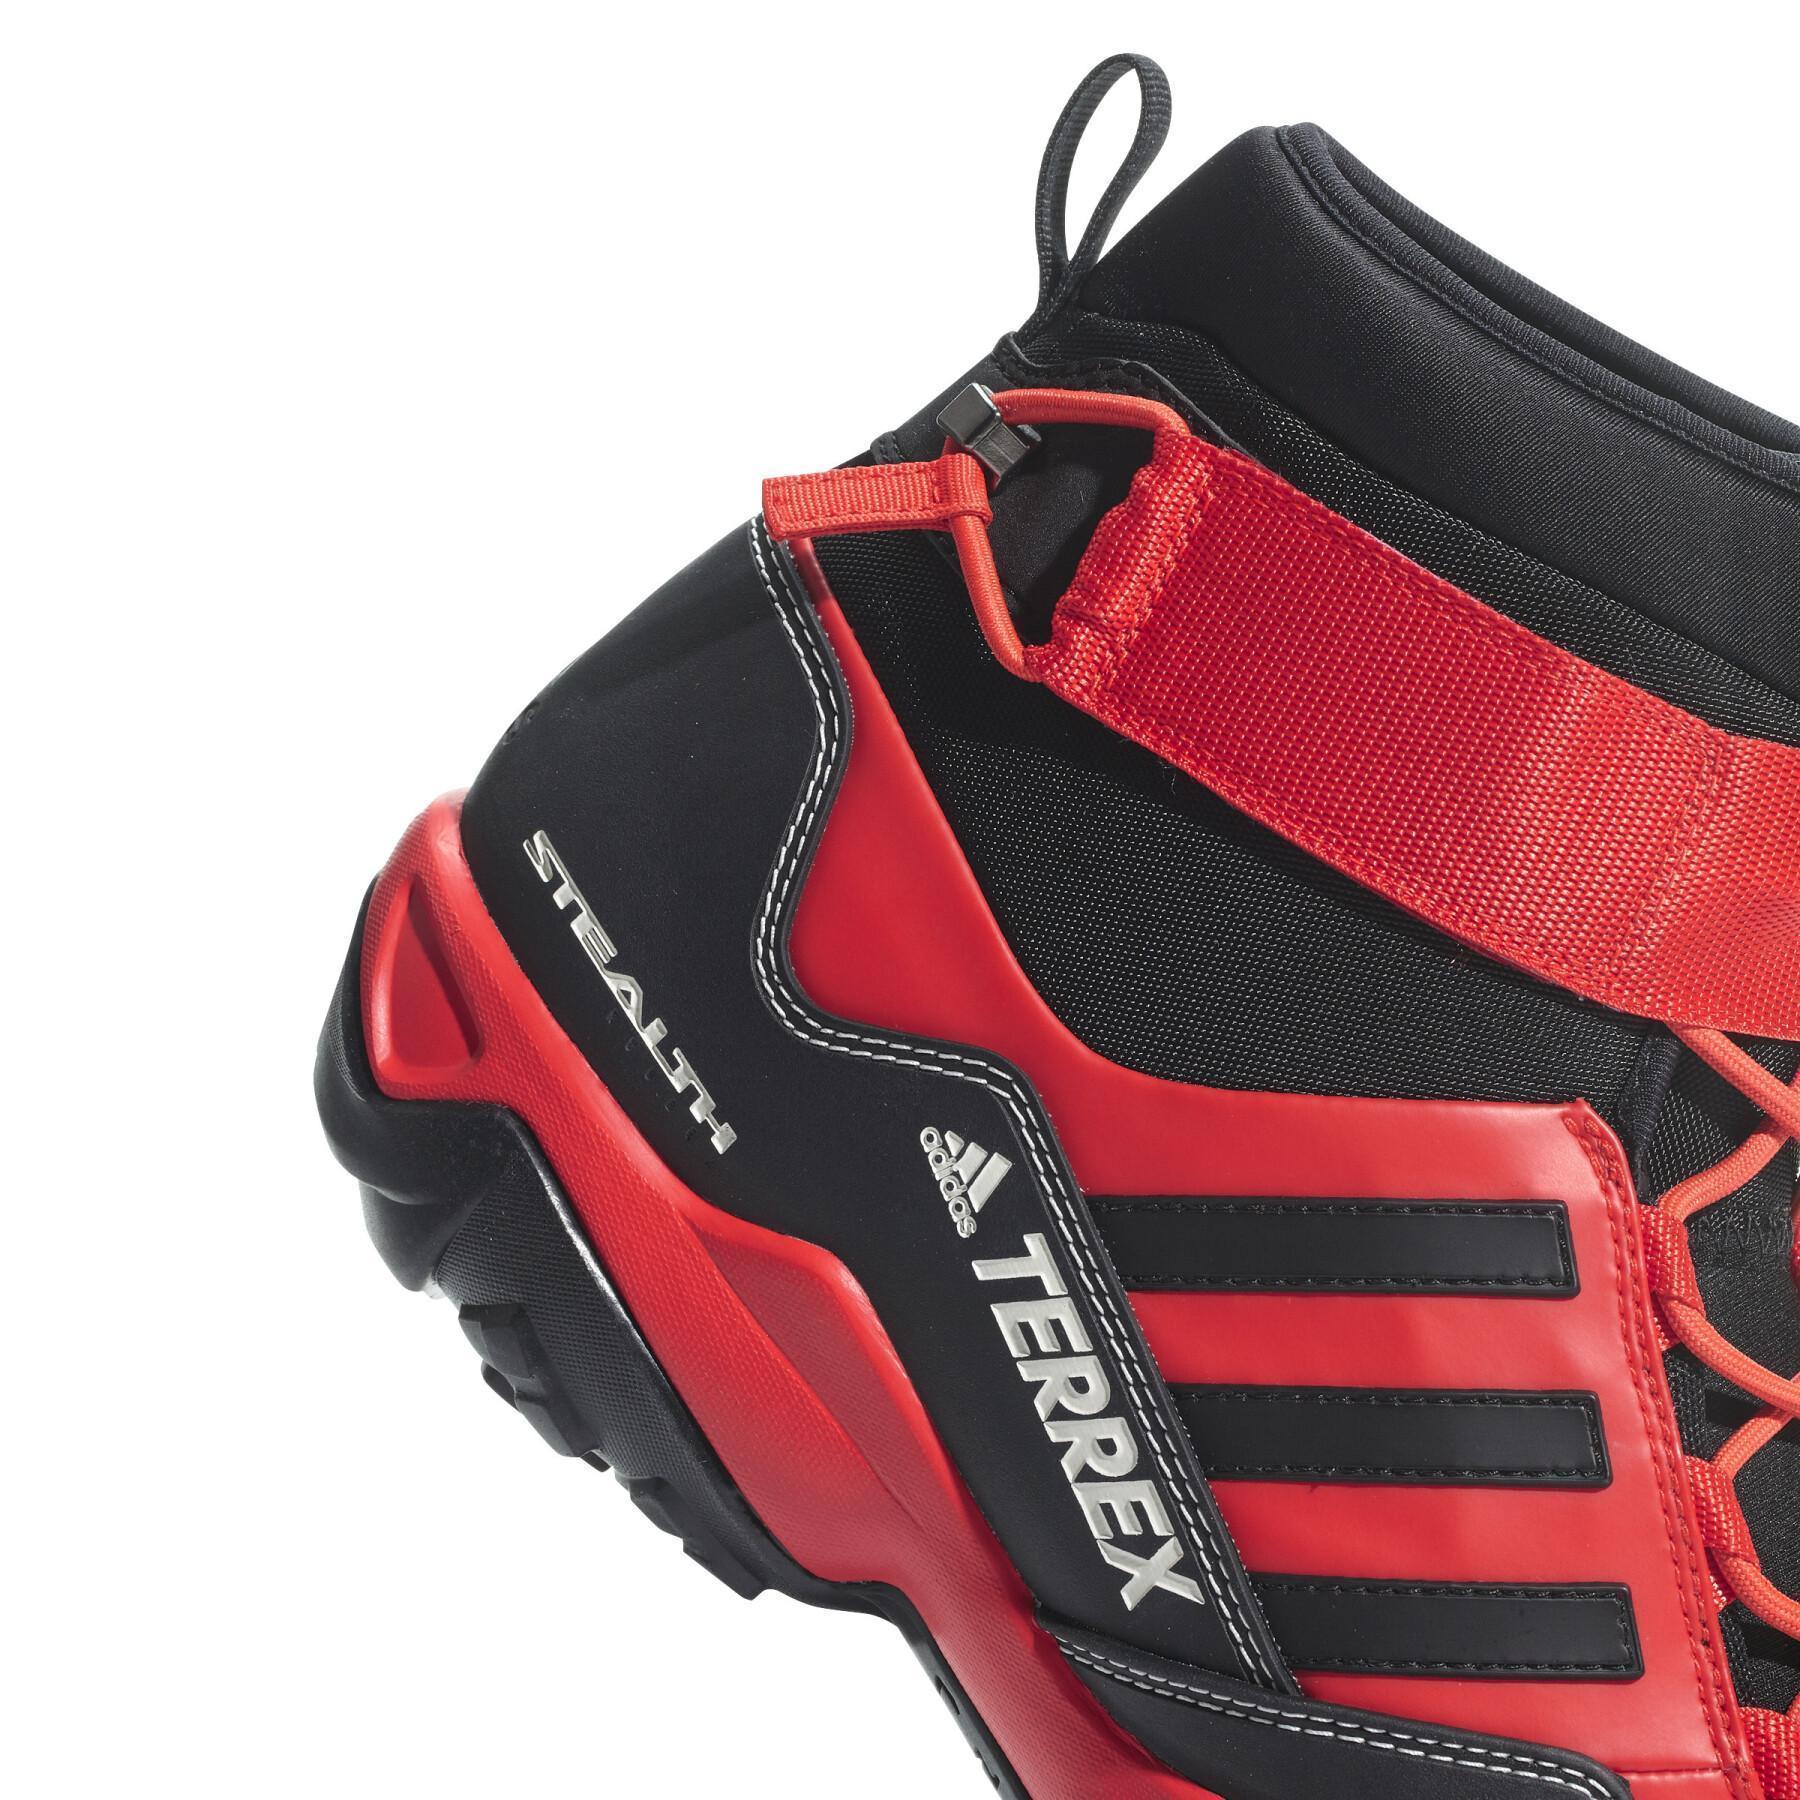 Trail running shoes adidas Terrex Hydro Lace